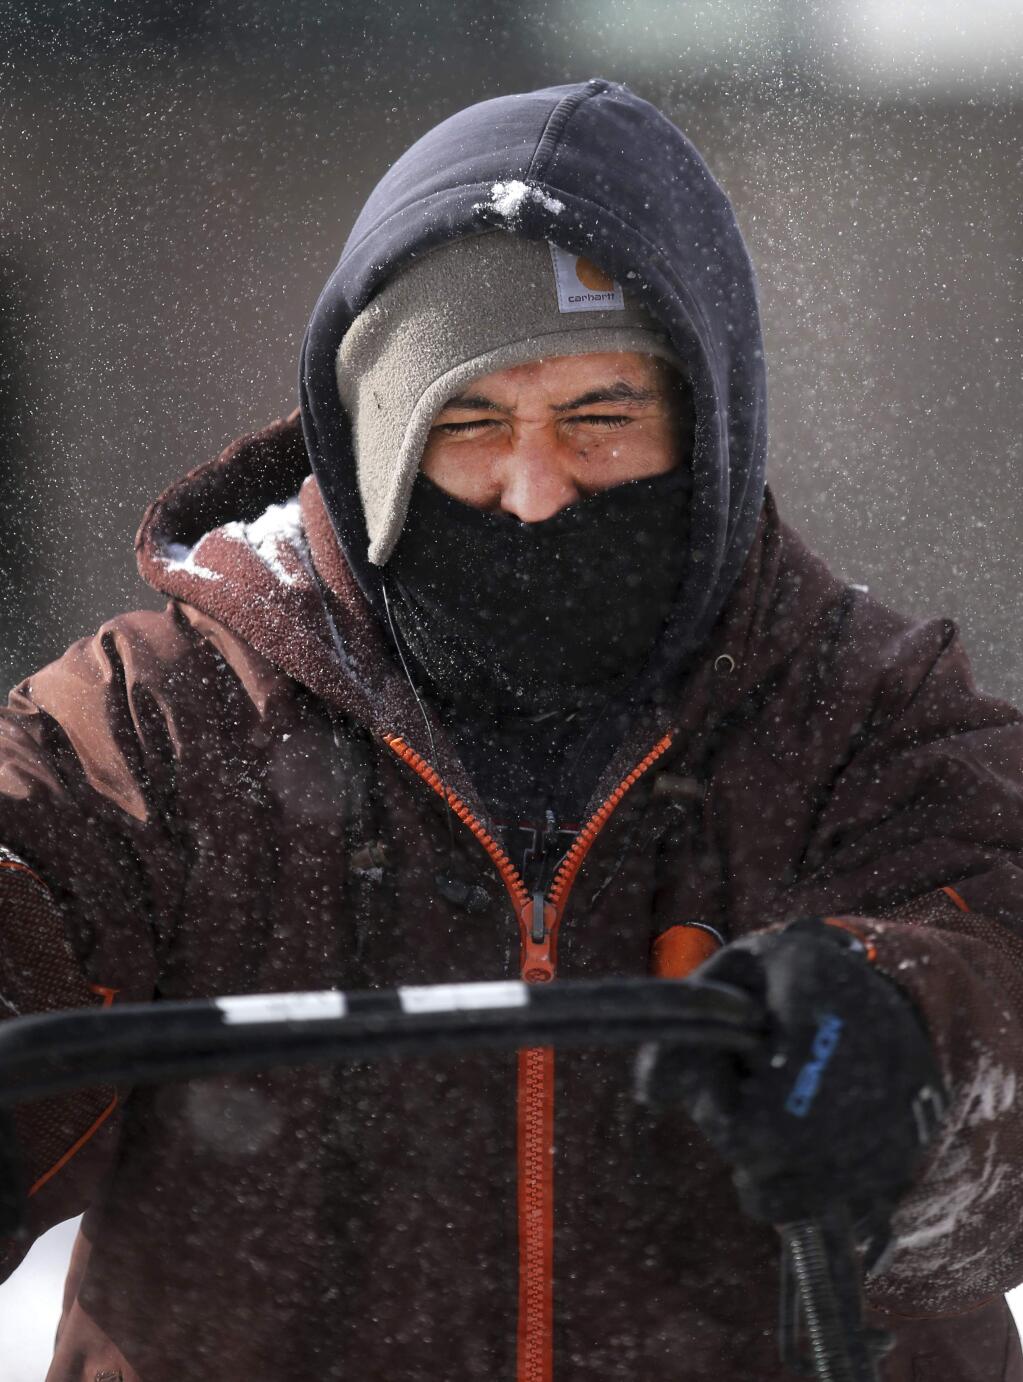 Miguel Honderez braves the cold to clear a sidewalk in the aftermath of a snowstorm on Thursday, March 14, 2019, in Cheyenne, Wyo. According to the National Weather Service, 14.6 inches of snow fell on the city, with maximum wind speeds clocking above 60 miles per hour. (Jacob Byk/The Wyoming Tribune Eagle via AP)